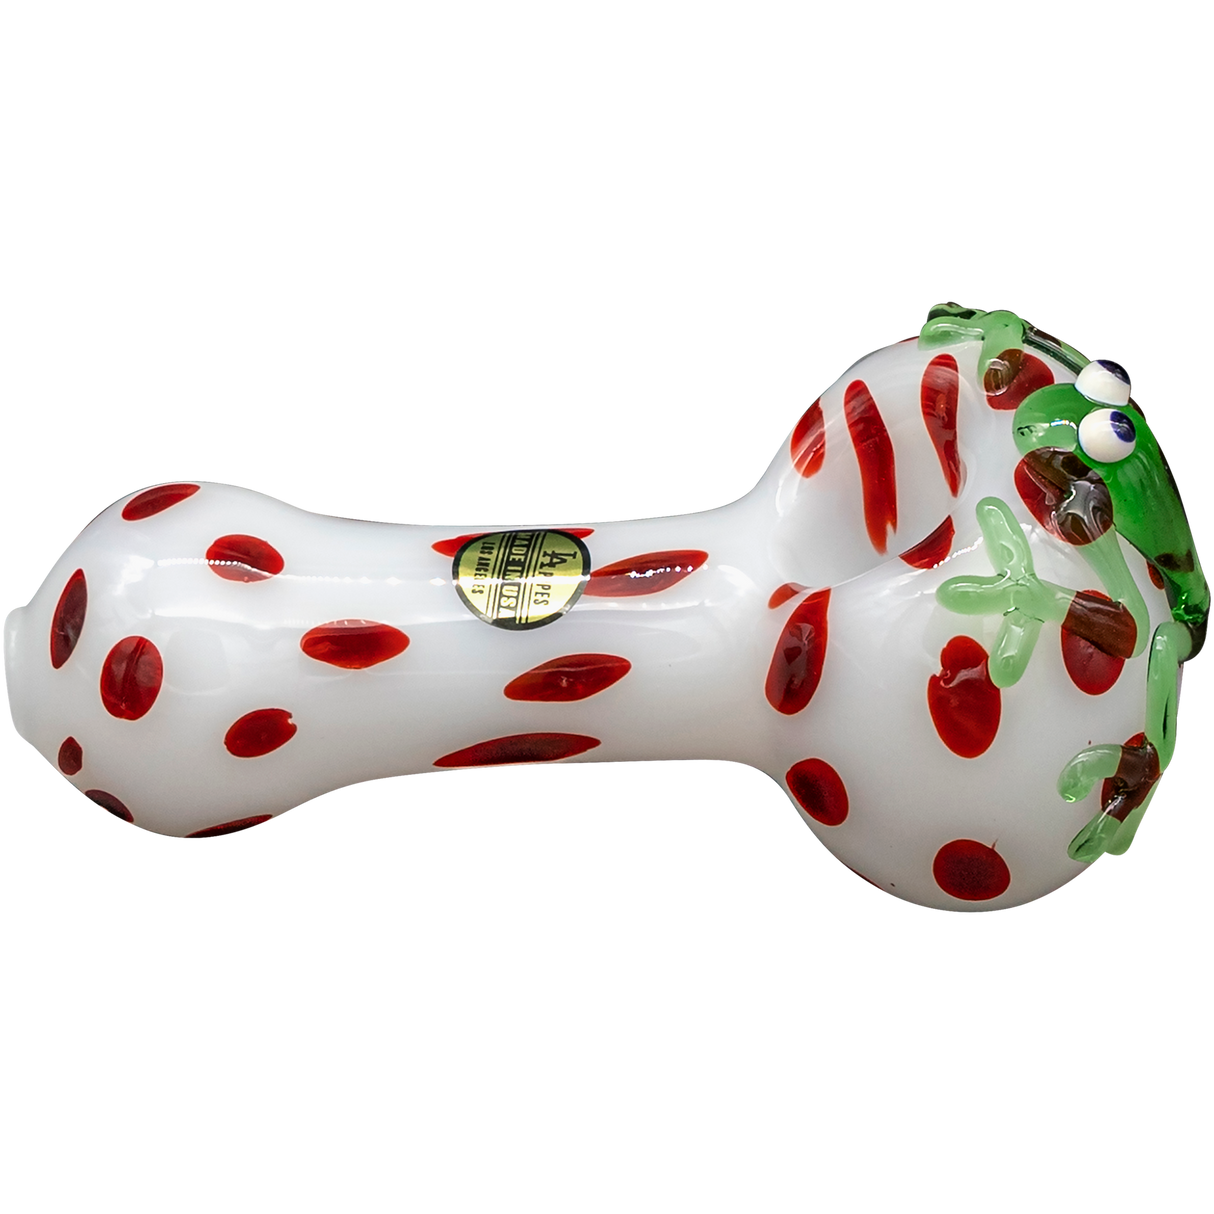 LA Pipes "Spotted Poison Frog" Spoon Glass Pipe, 4" Compact Borosilicate, Side View